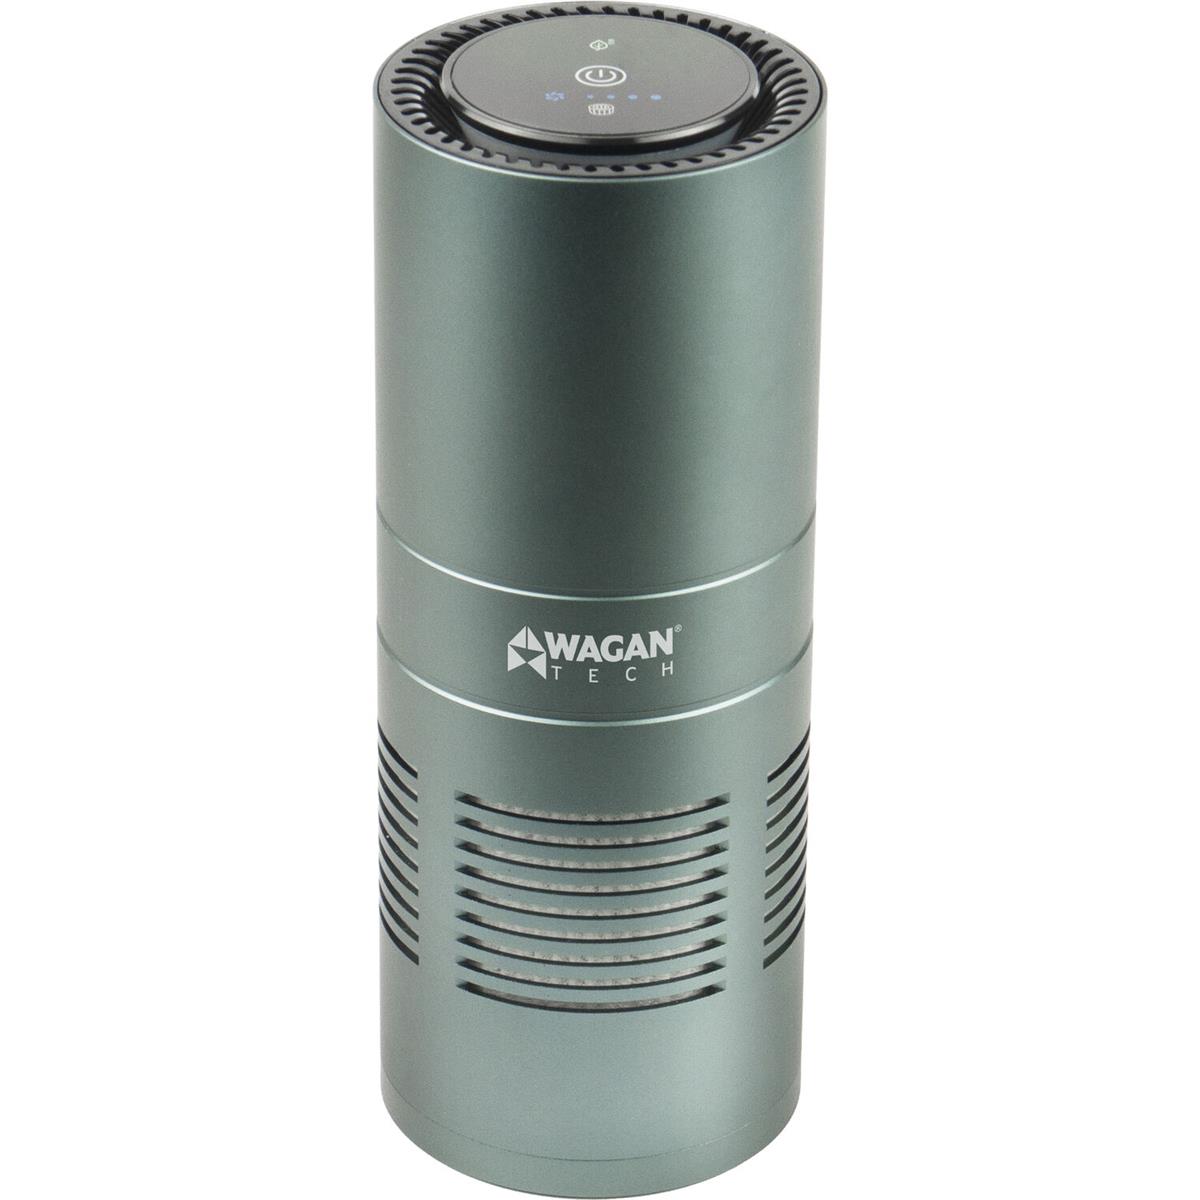 Image of Wagan USB Deluxe Air Purifier